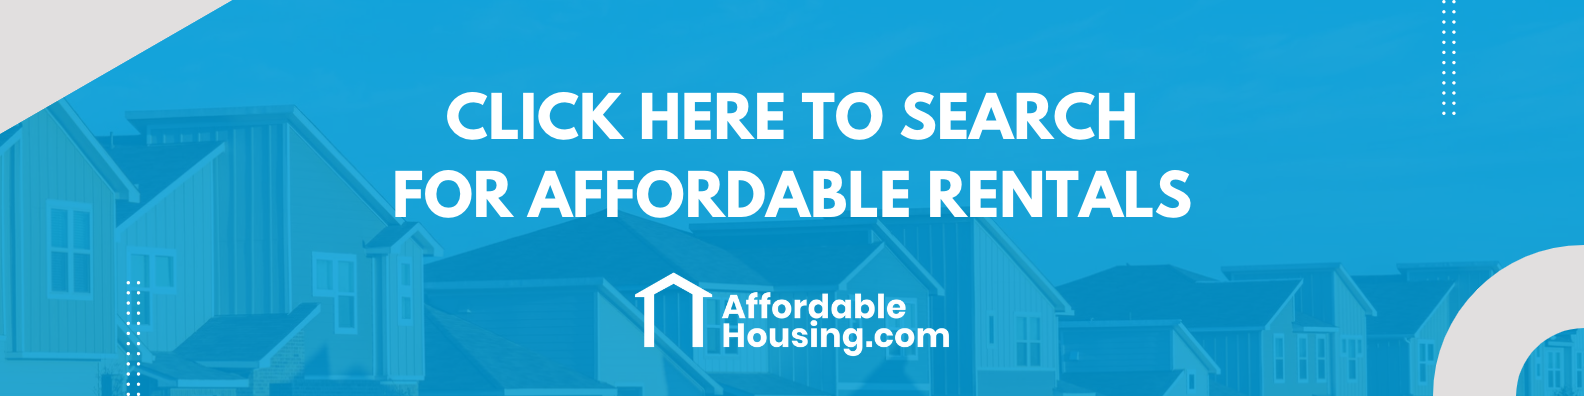 Click Here Banner for Affordable Housing Search